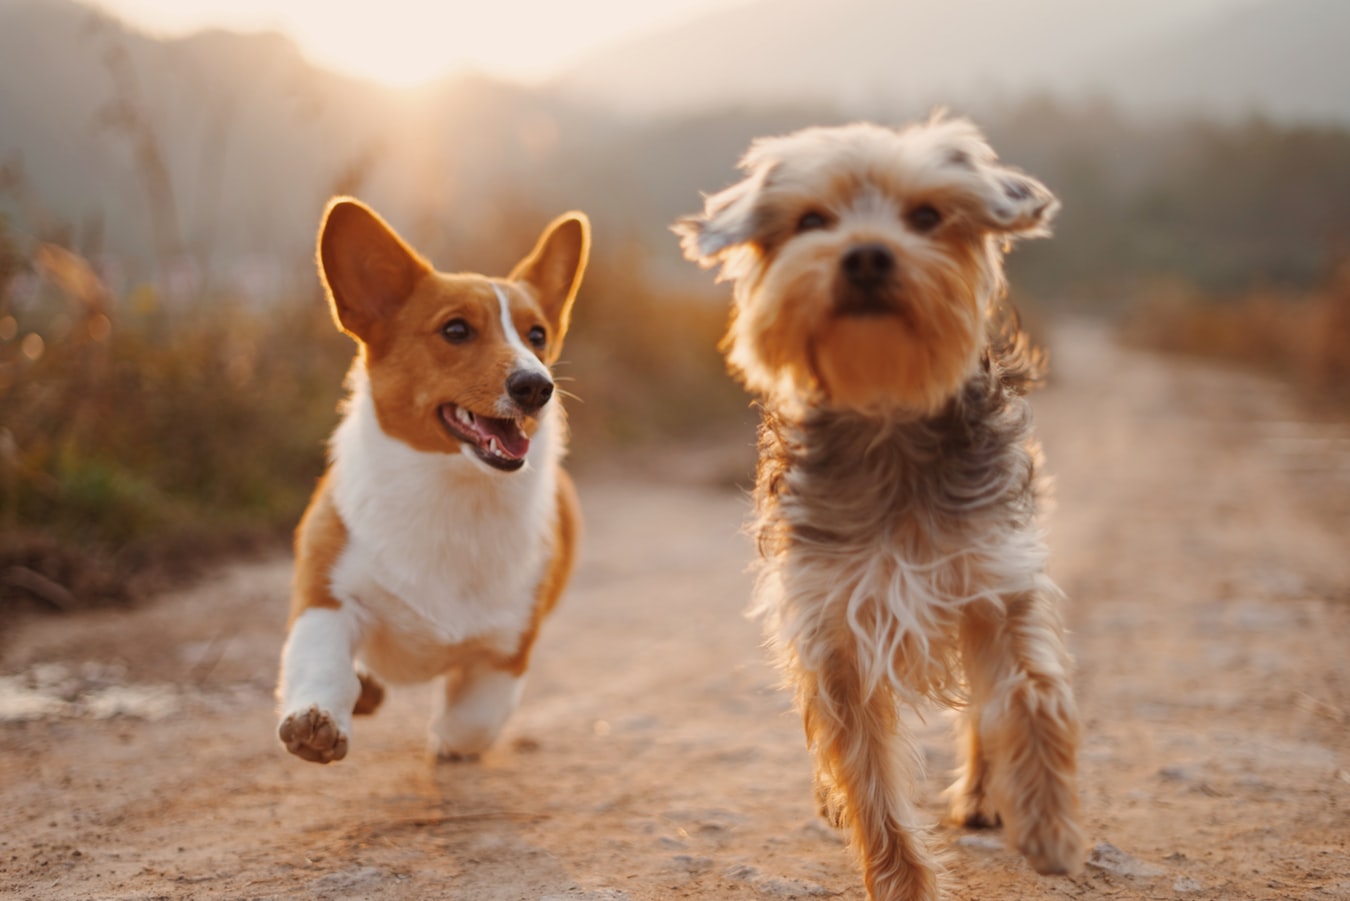 CBD Oil: A Wonder Panacea Even For Our Canine Friends | Uncustomary